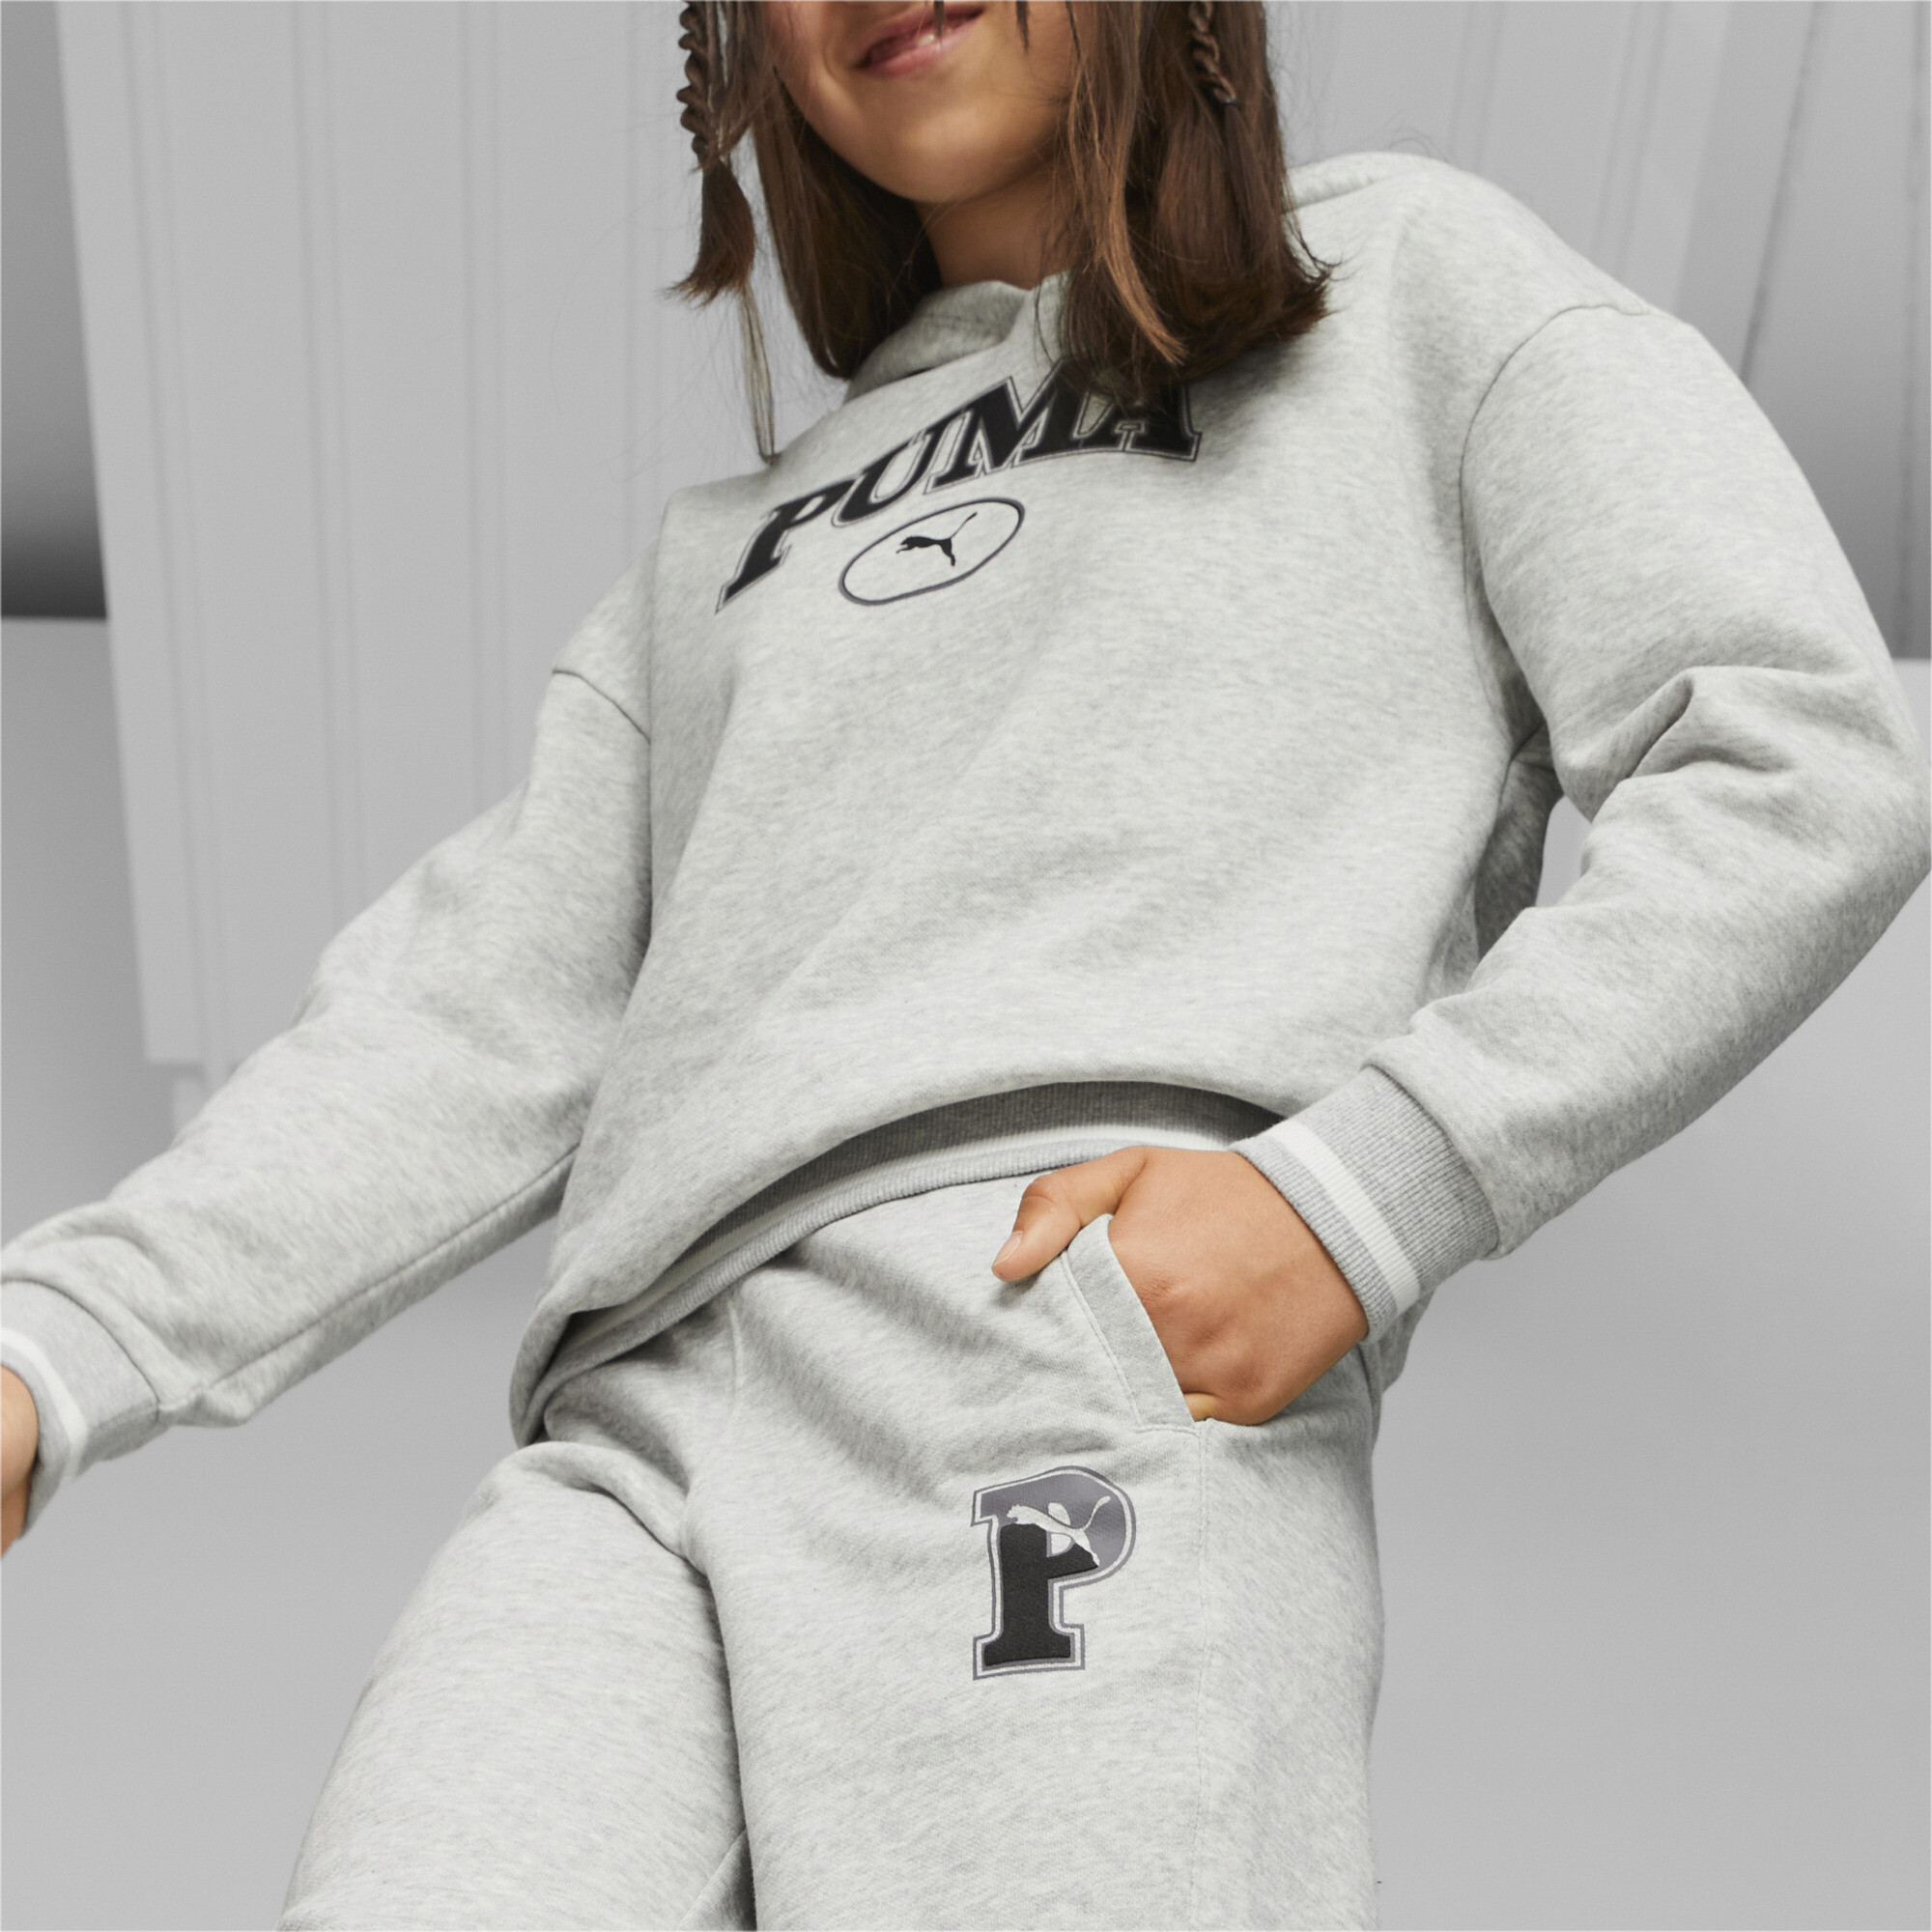 PUMA SQUAD Sweatpants In Heather, Size 13-14 Youth